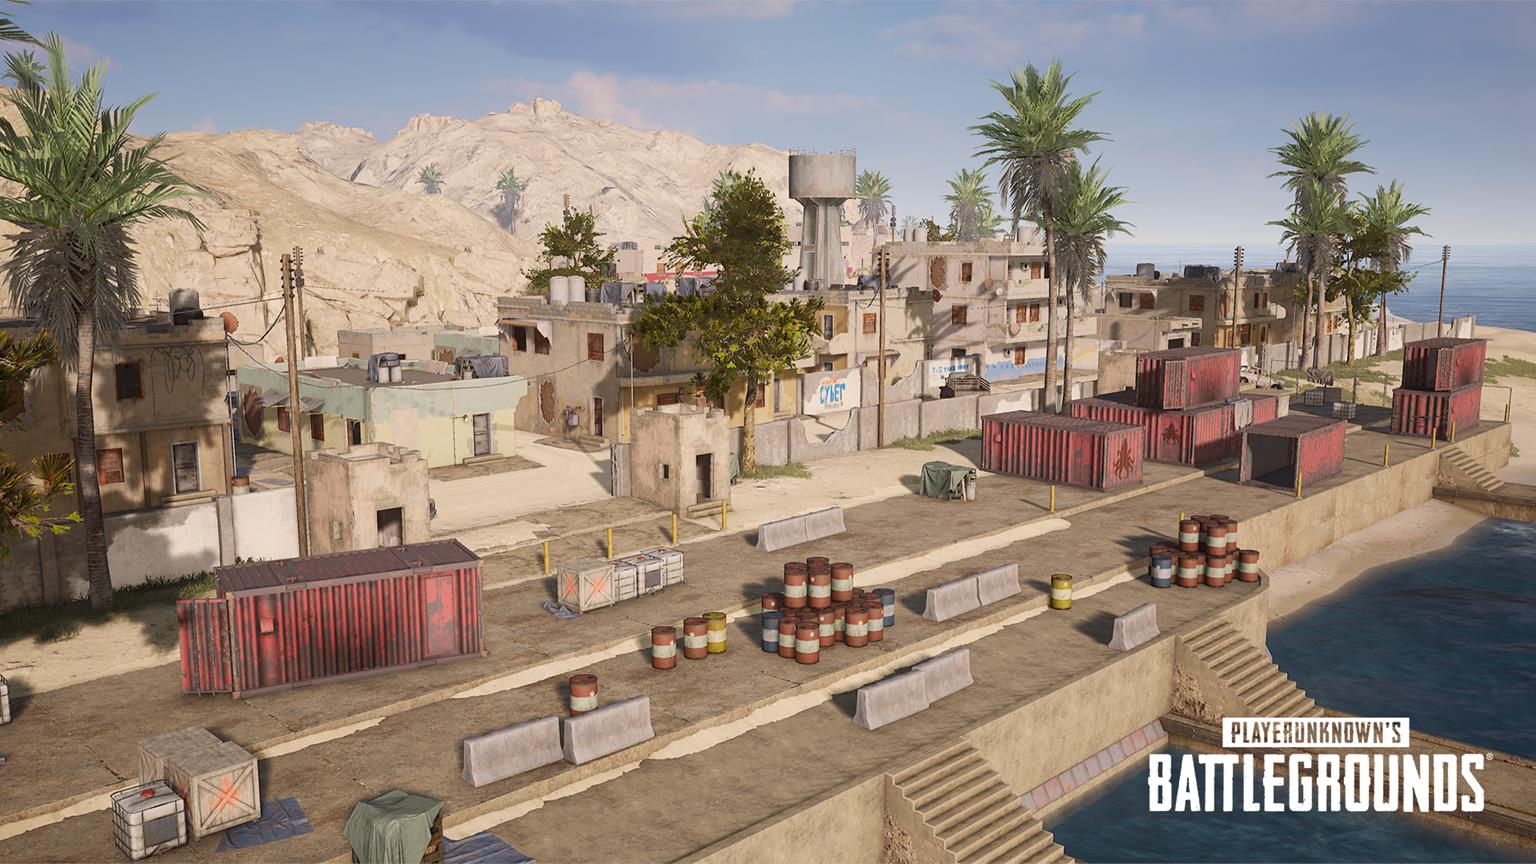 PUBG Mobile: New Karakin map is set to release on April 7, 2021 PC